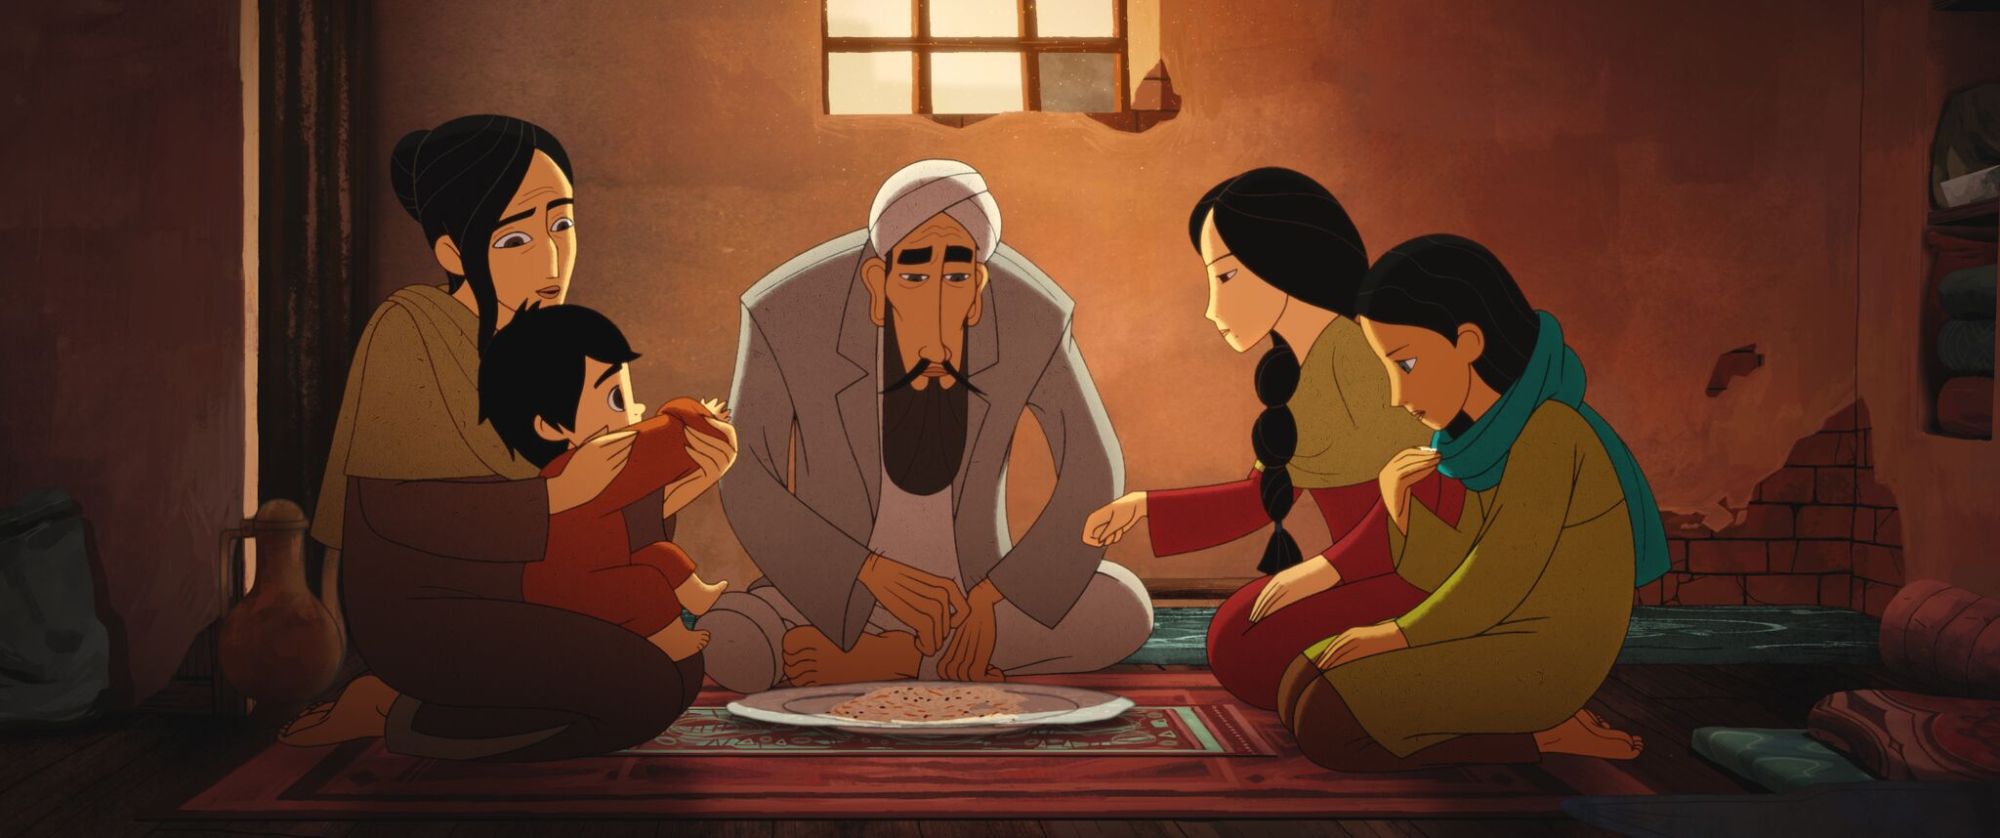 Film still: Showing Parvana and her family sit down for food